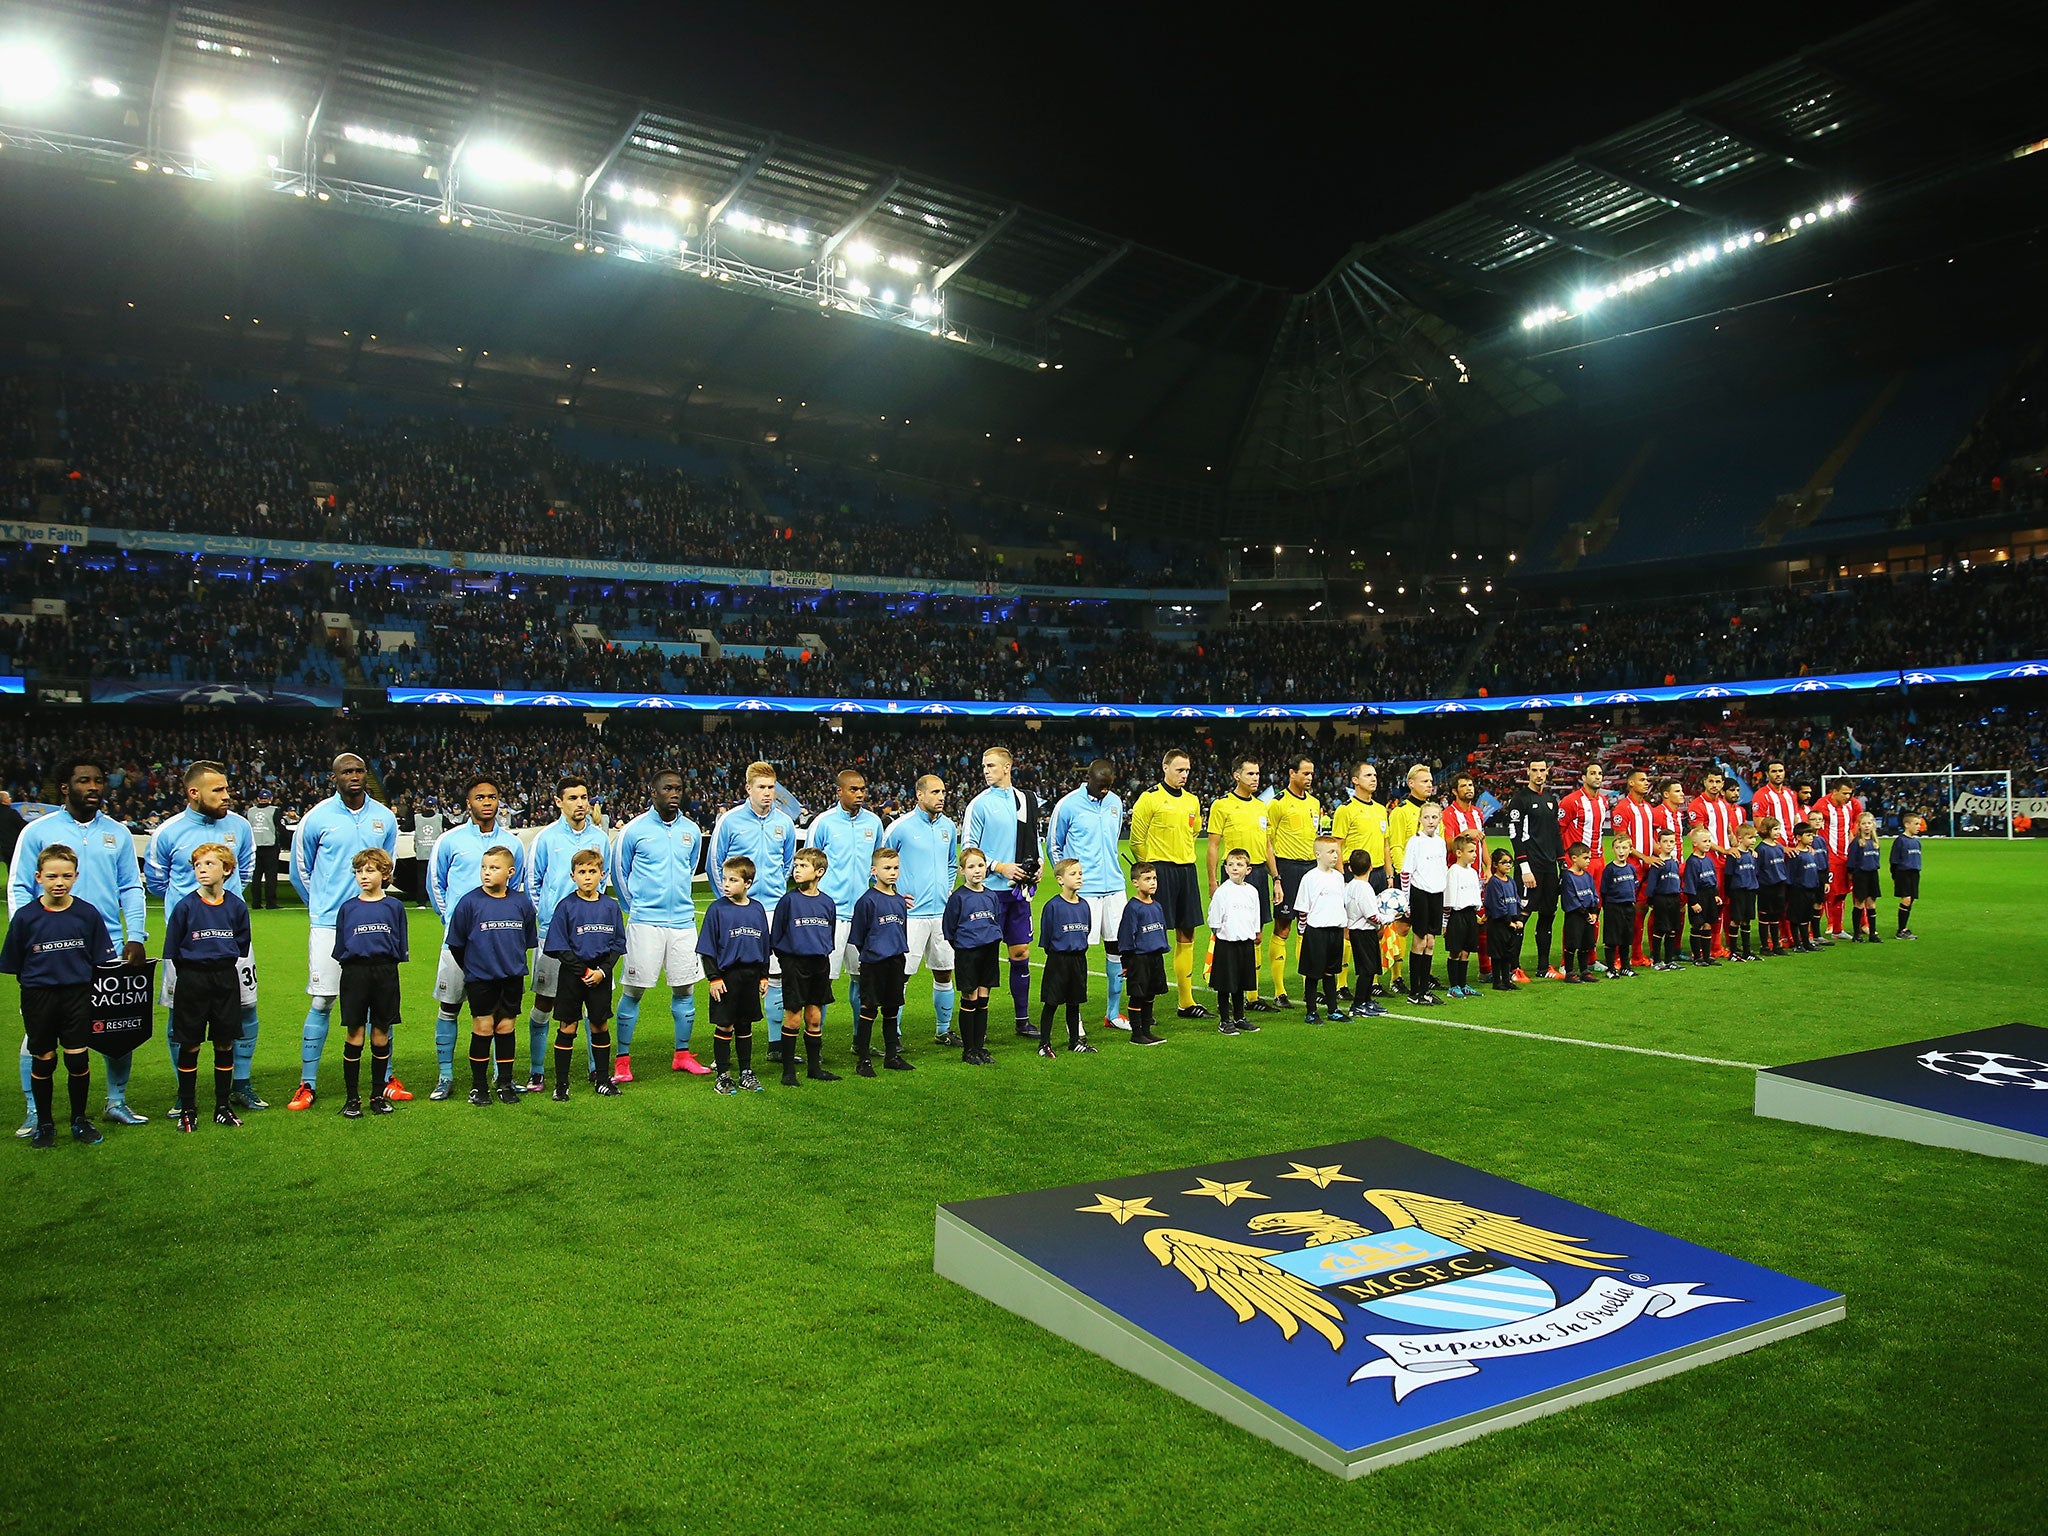 Manchester City are being investigated by Uefa over their fans booing the Champions League anthem